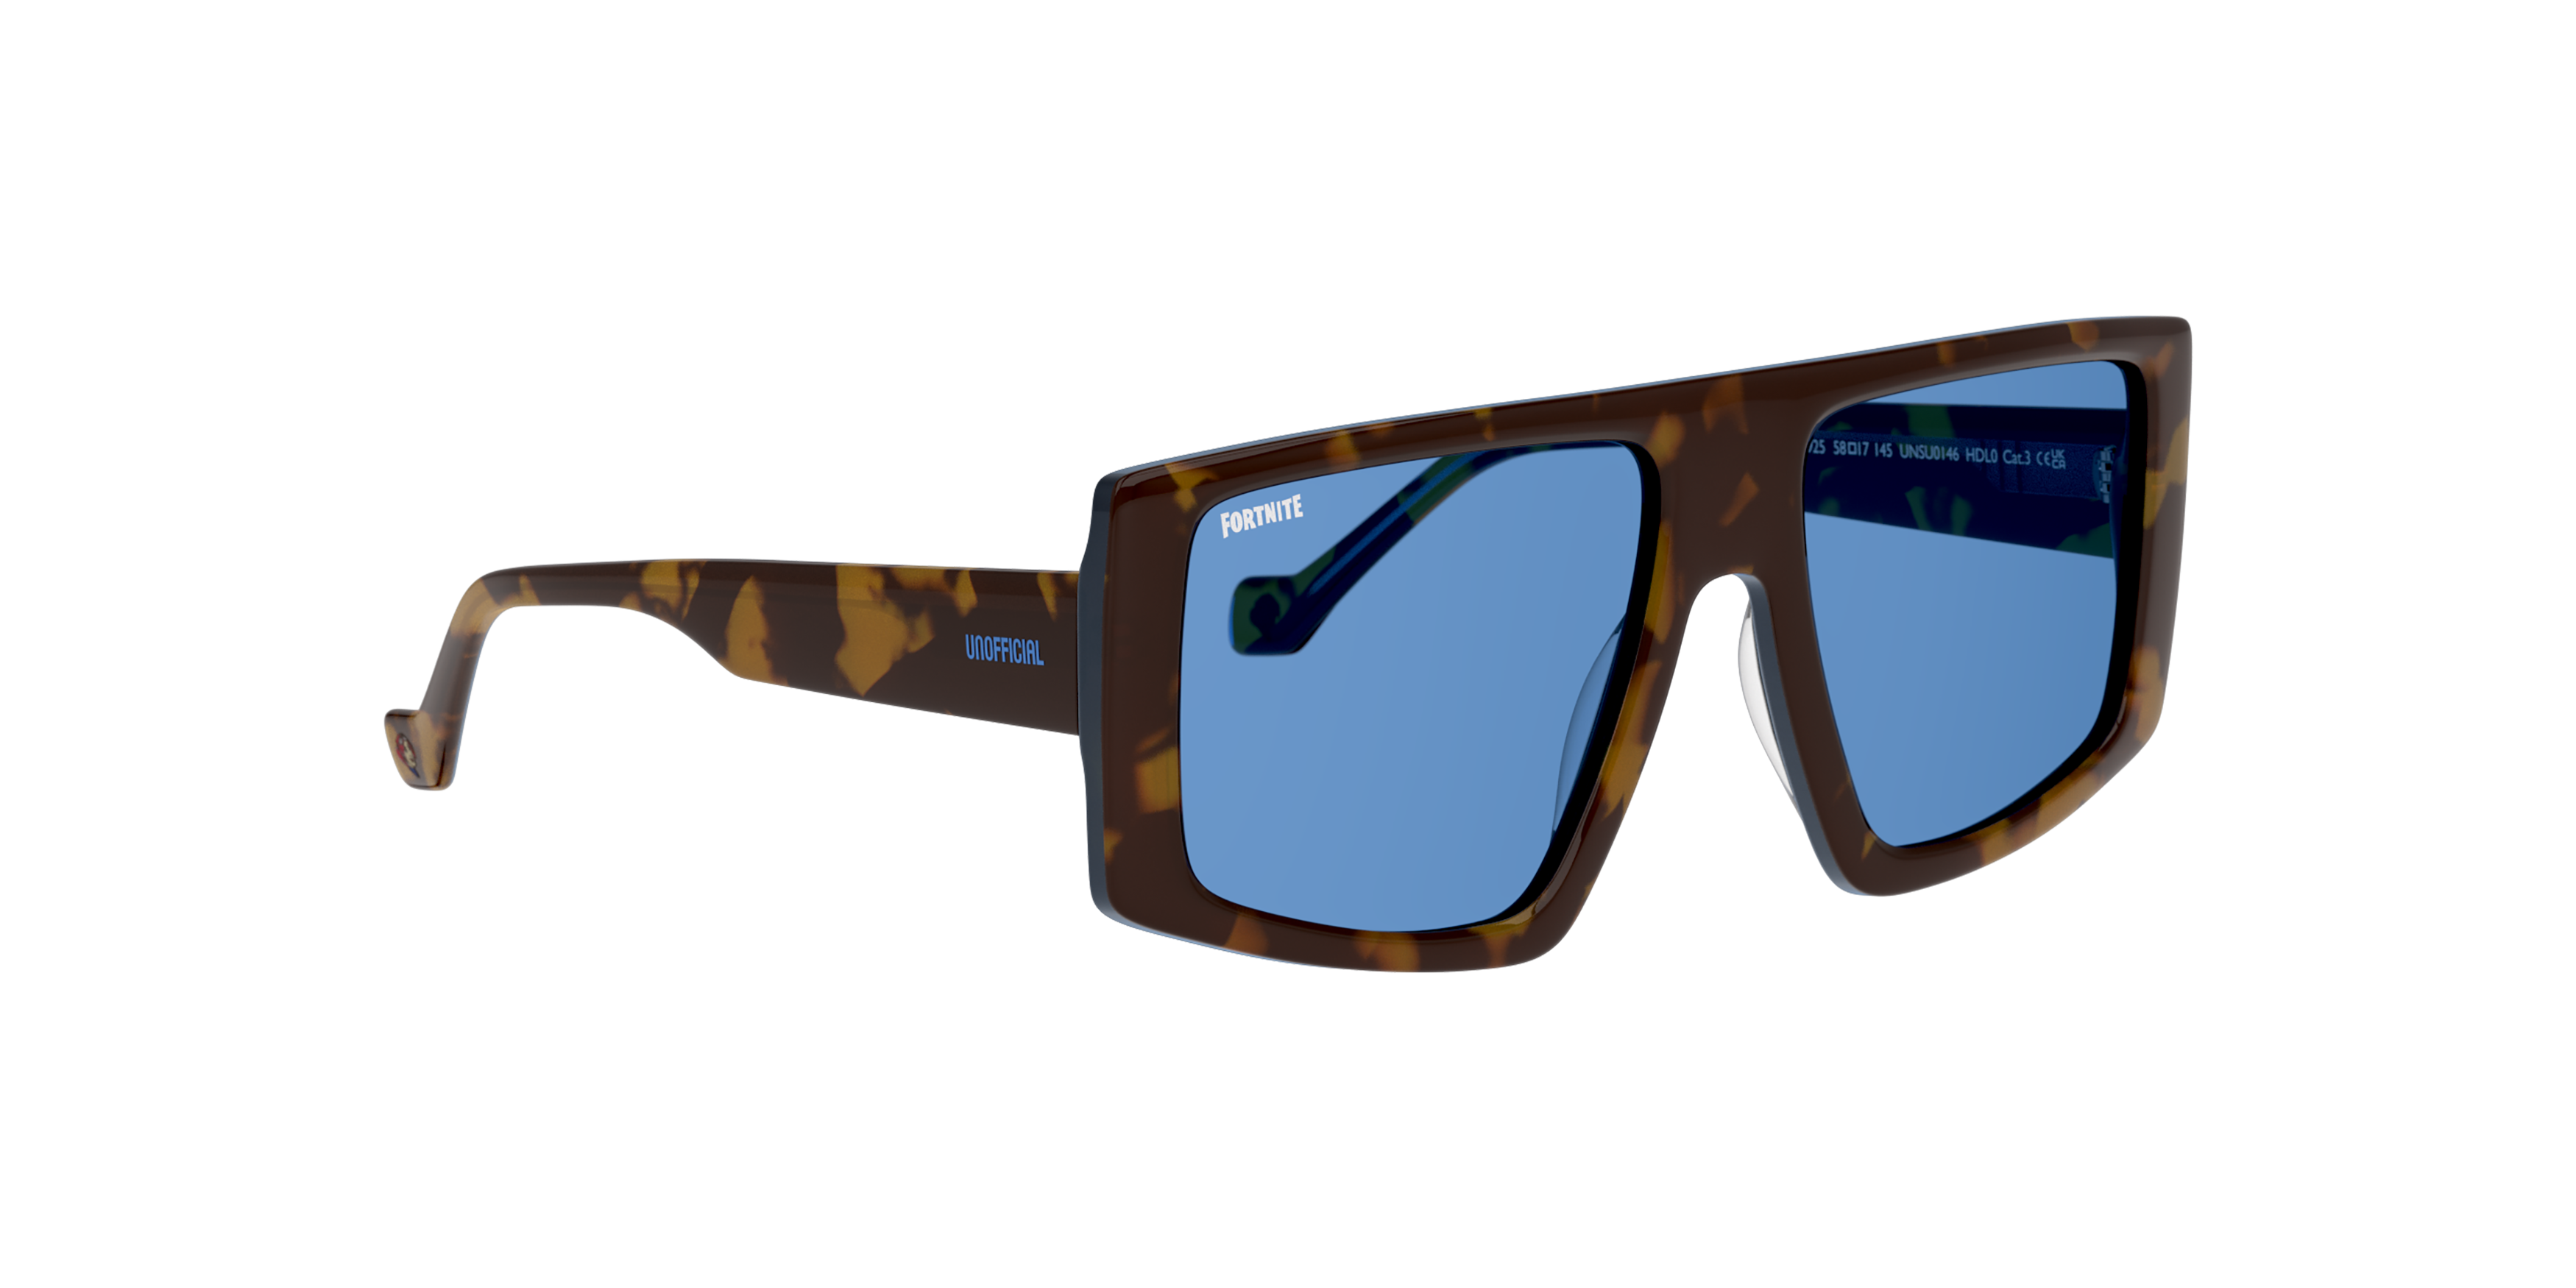 Angle_Right01 Fortnite with Unofficial UNSU0146 Sunglasses Blue / Havana